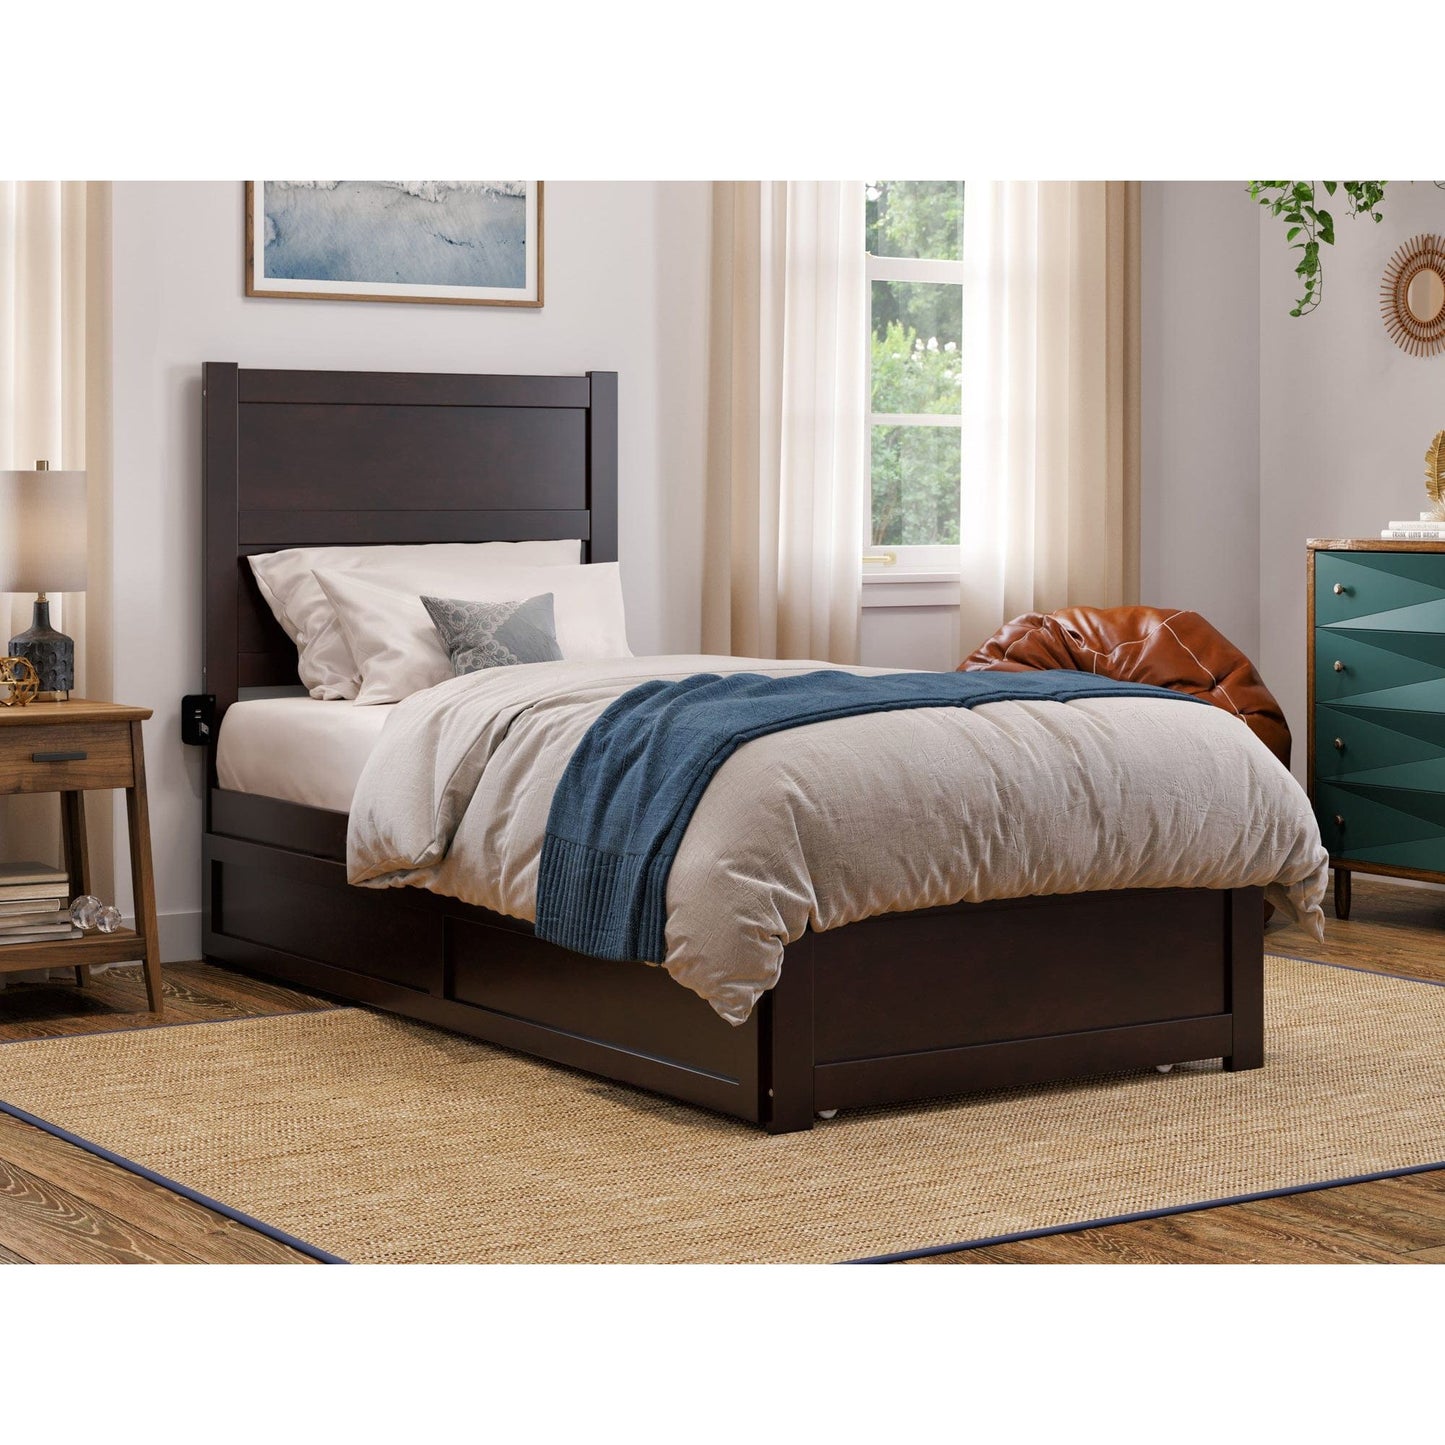 AFI Furnishings NoHo Twin Extra Long Bed with Footboard and Twin Extra Long Trundle in Espresso AG9161111